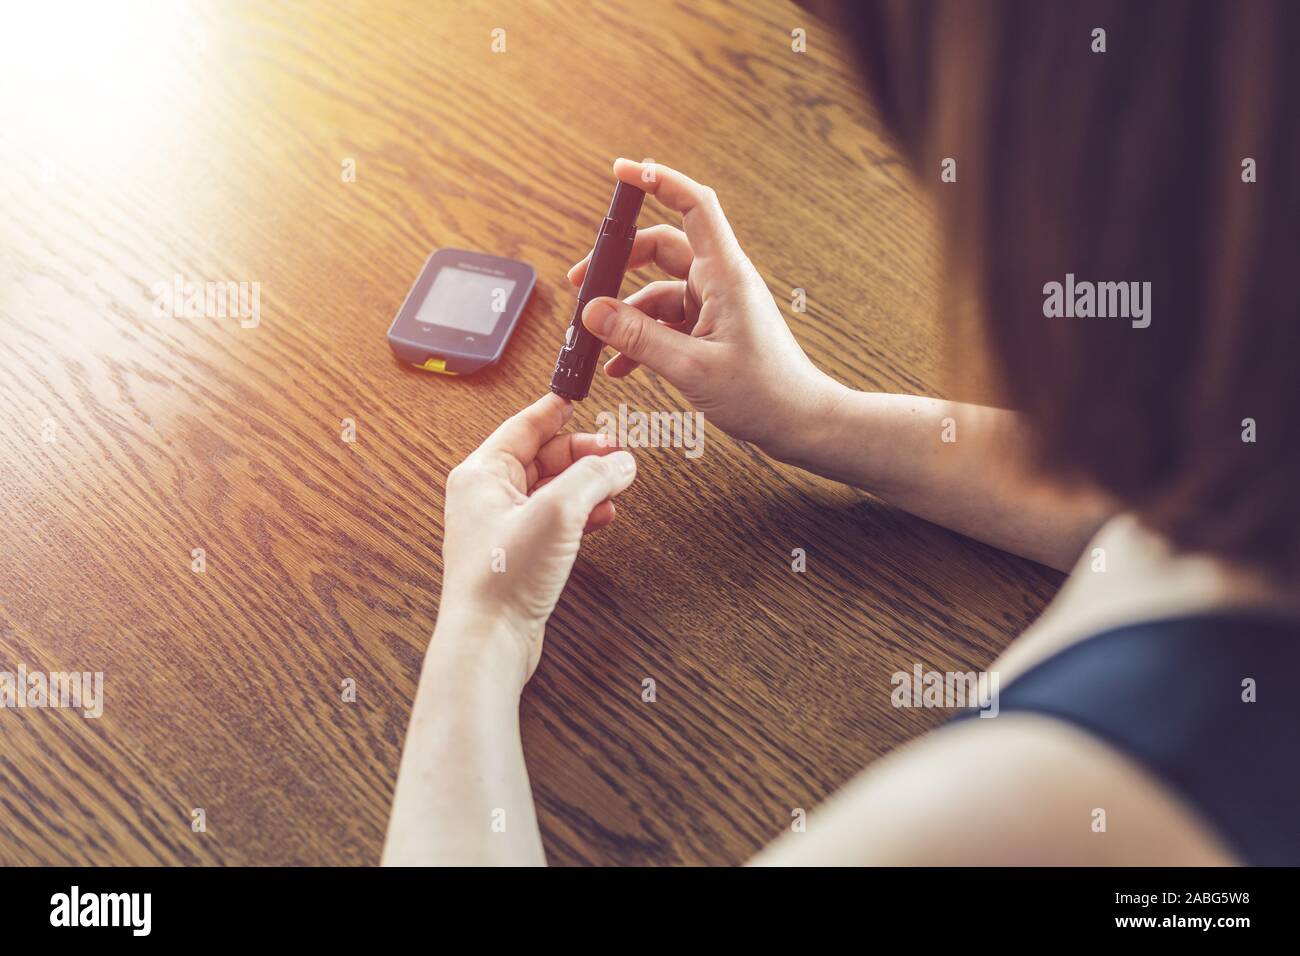 Woman using lancet to take blood sample to check glucose level with traditional glucometer Stock Photo